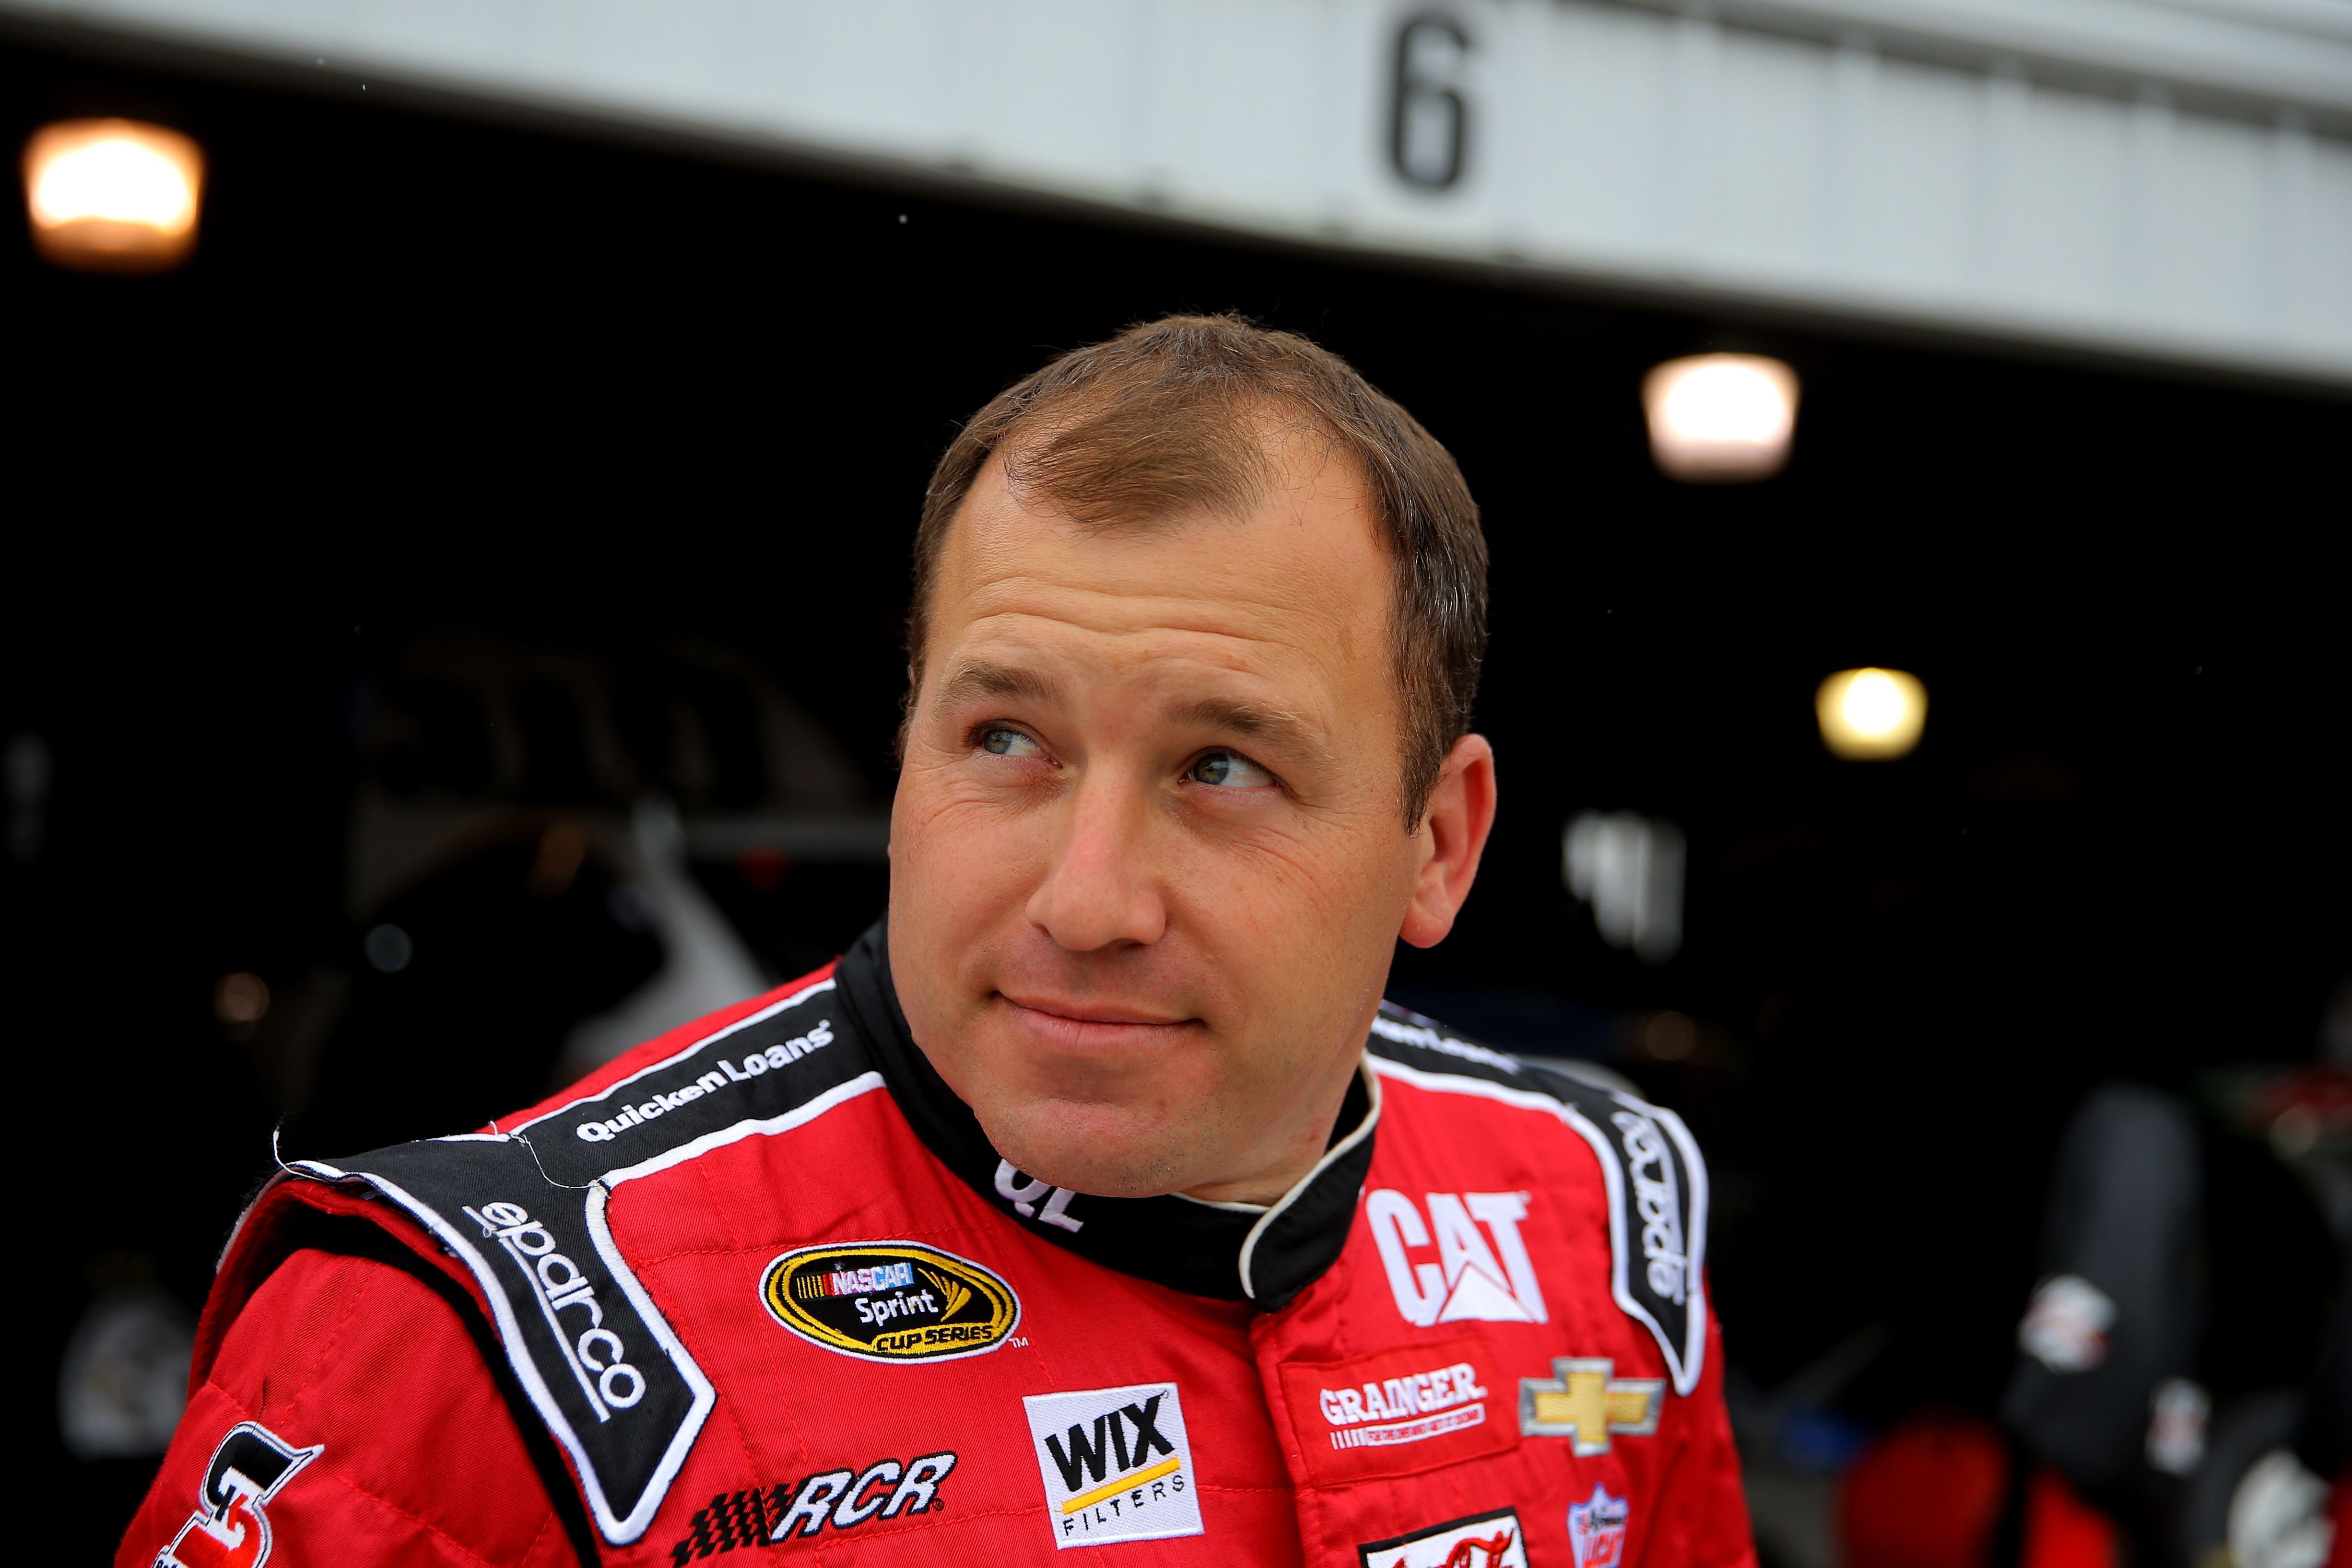 Ryan Newman looks on in the garage area during practice for the NASCAR Sprint Cup Series STP 500 at Martinsville Speedway on March 27, 2015 | Photo: Getty Images